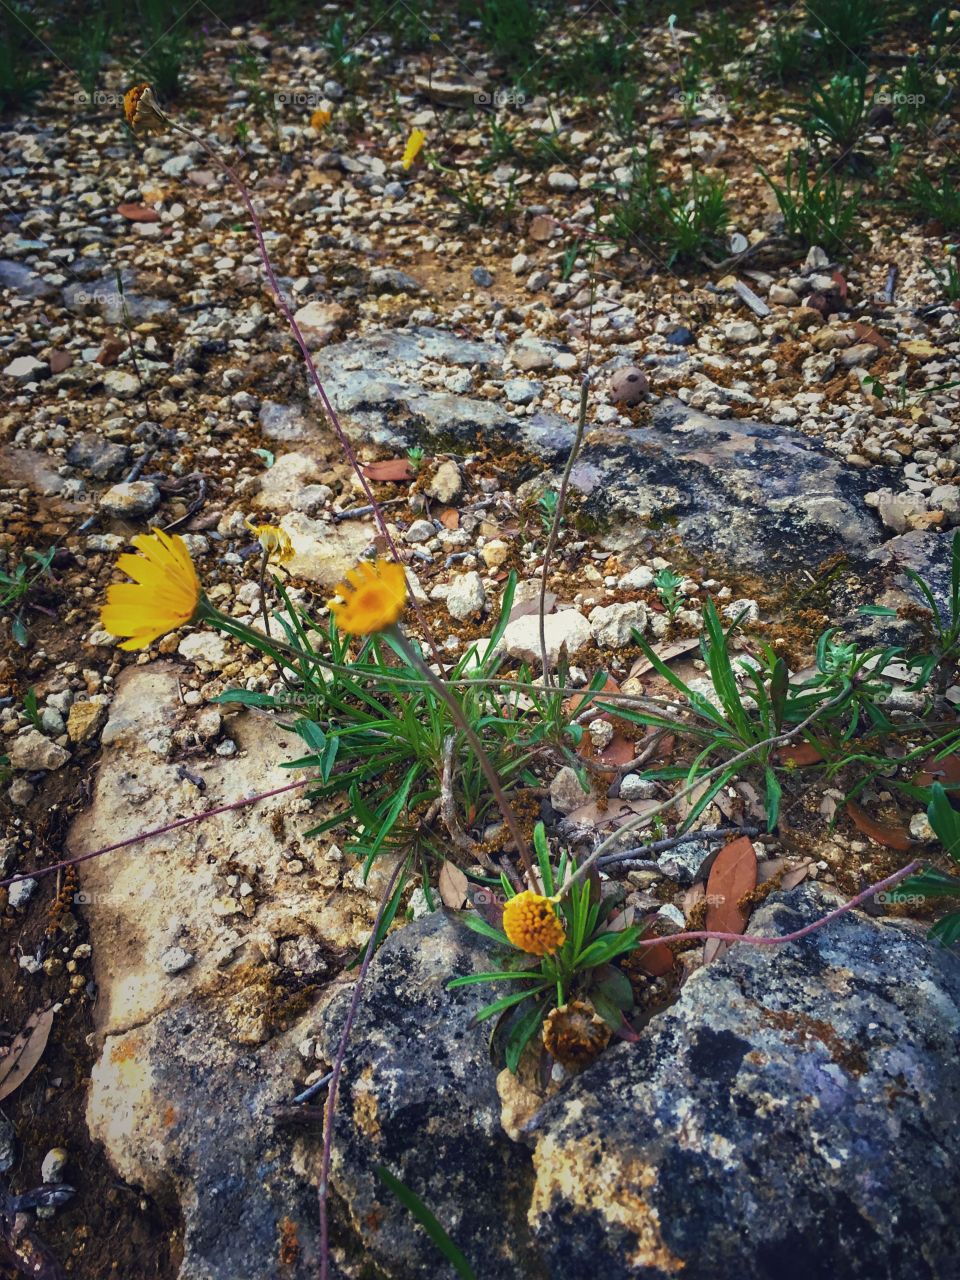 Texas Hill Country wild flowers - rugged, resilient, but beautiful nevertheless 